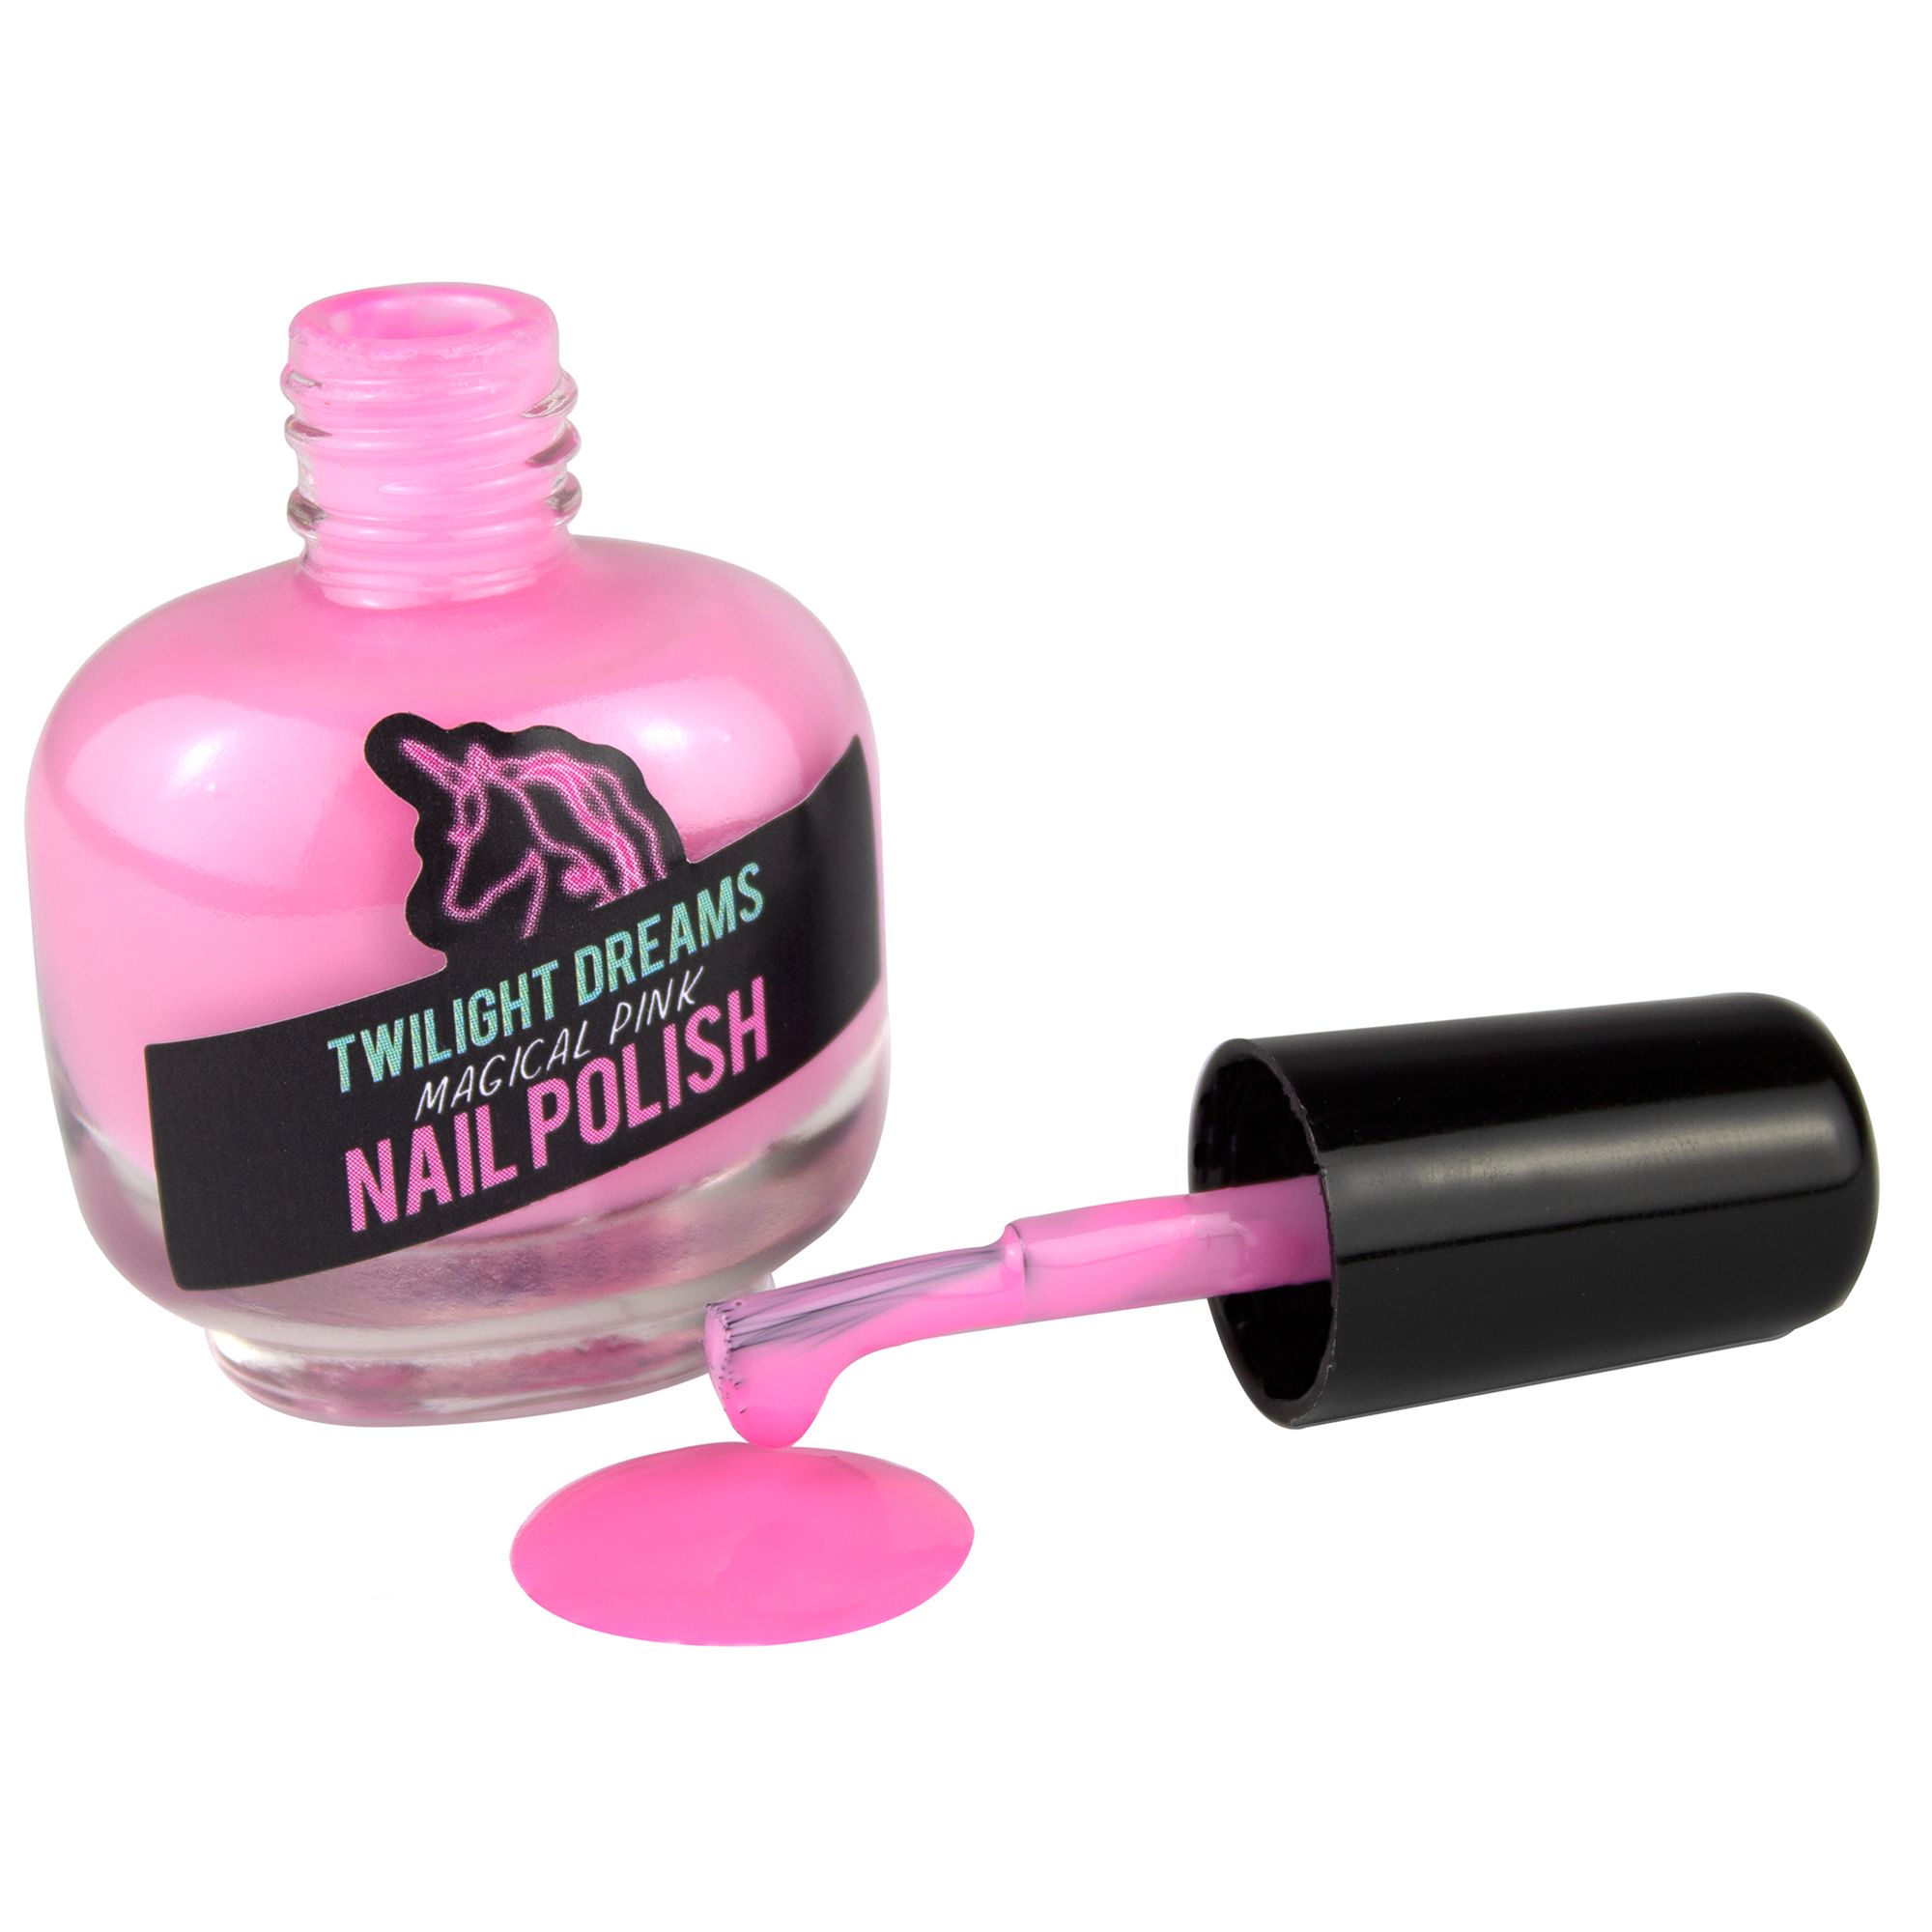 NPW Unicorn Colour Change Nail Polish, Pack of 2, Pink/Silver at John Lewis & Partners